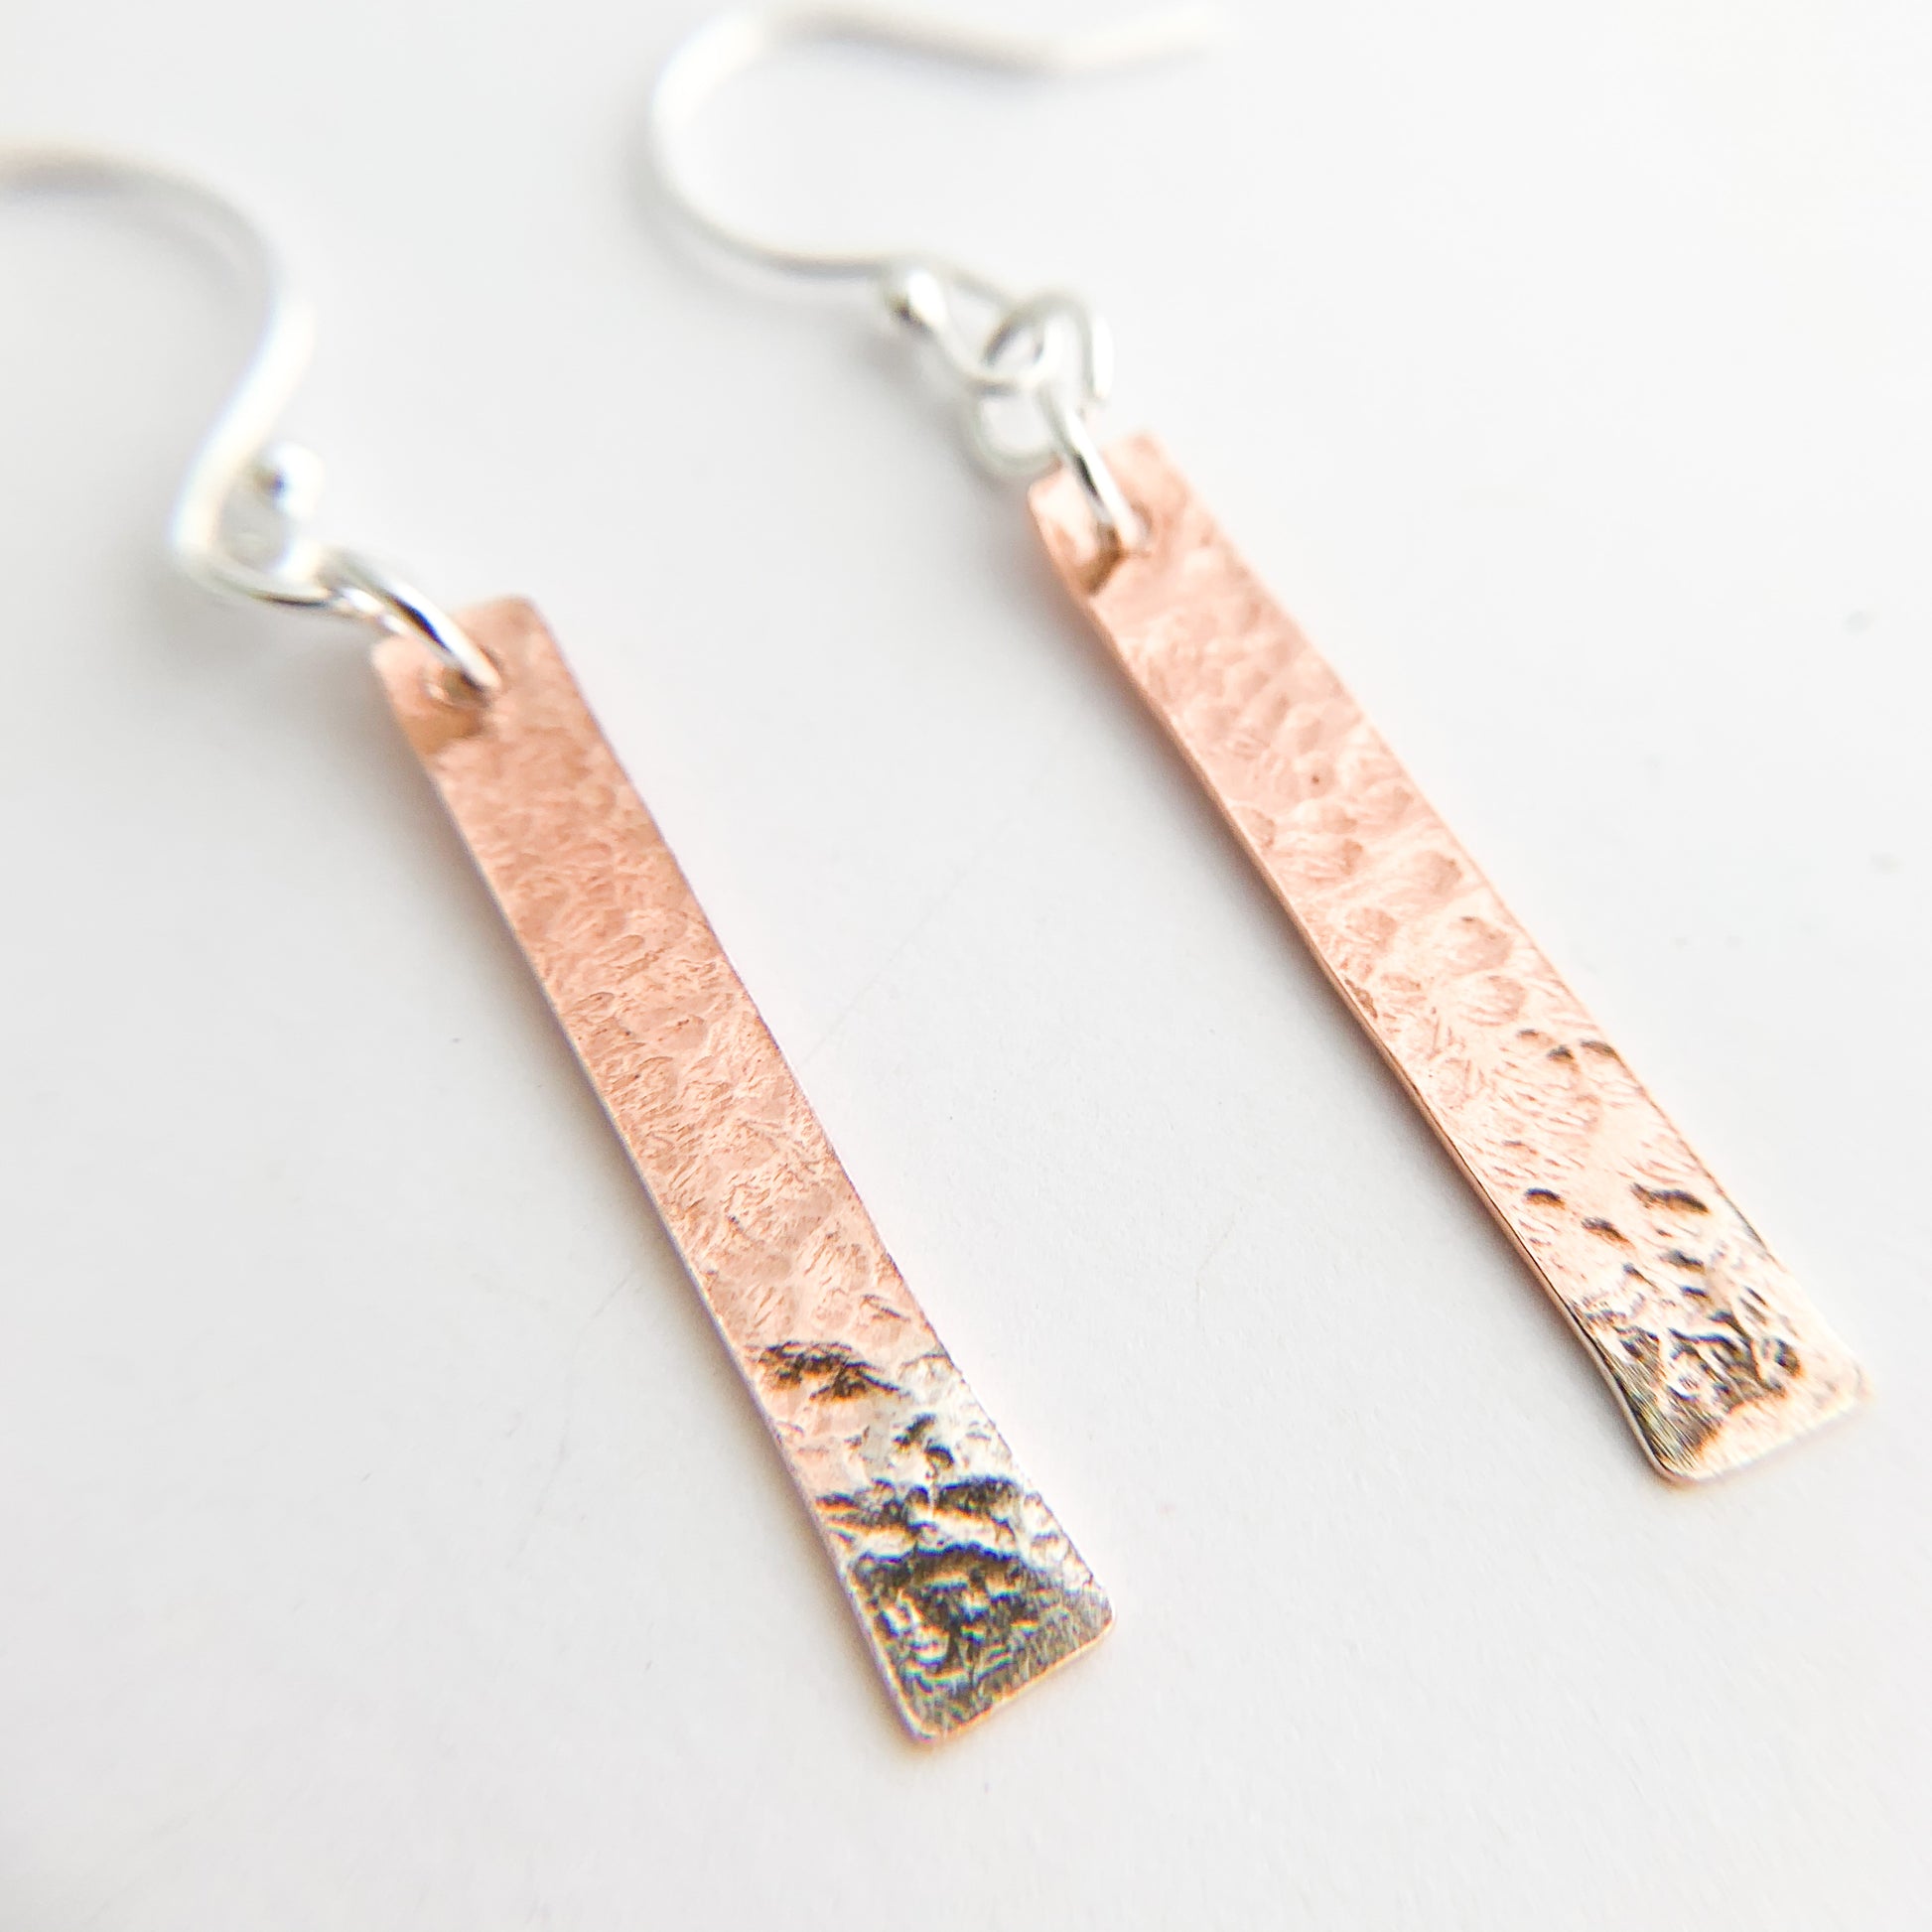 Hammered Copper Bar Earrings with Silver Tips